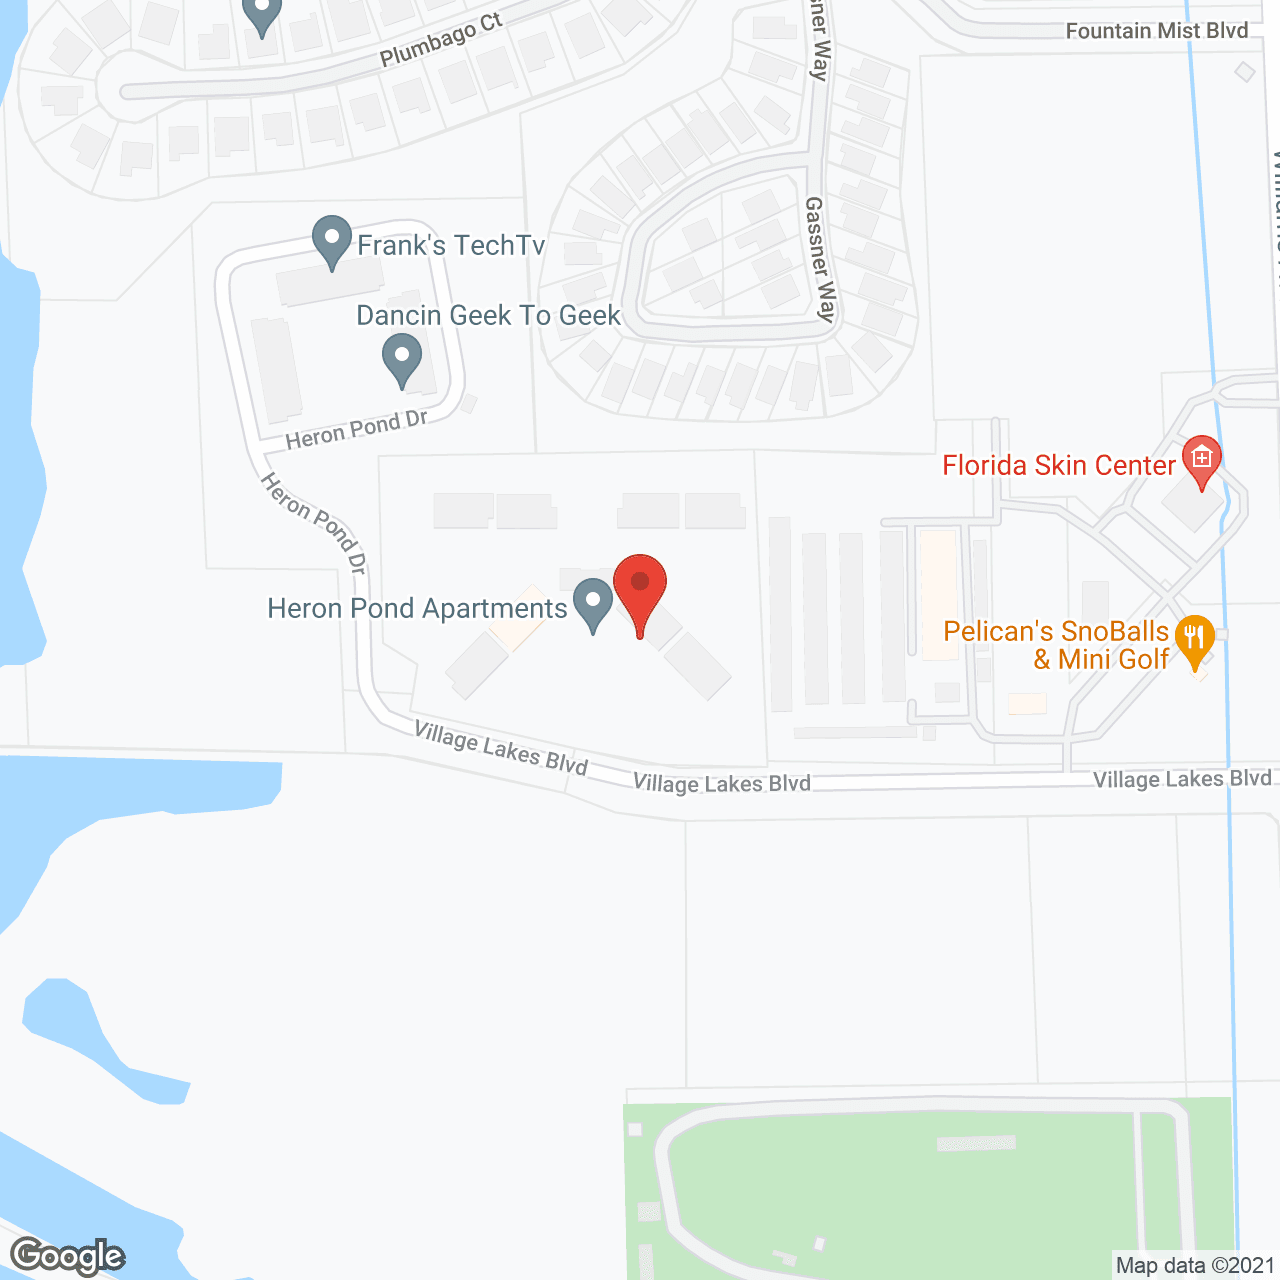 Heron Pond Apartments in google map